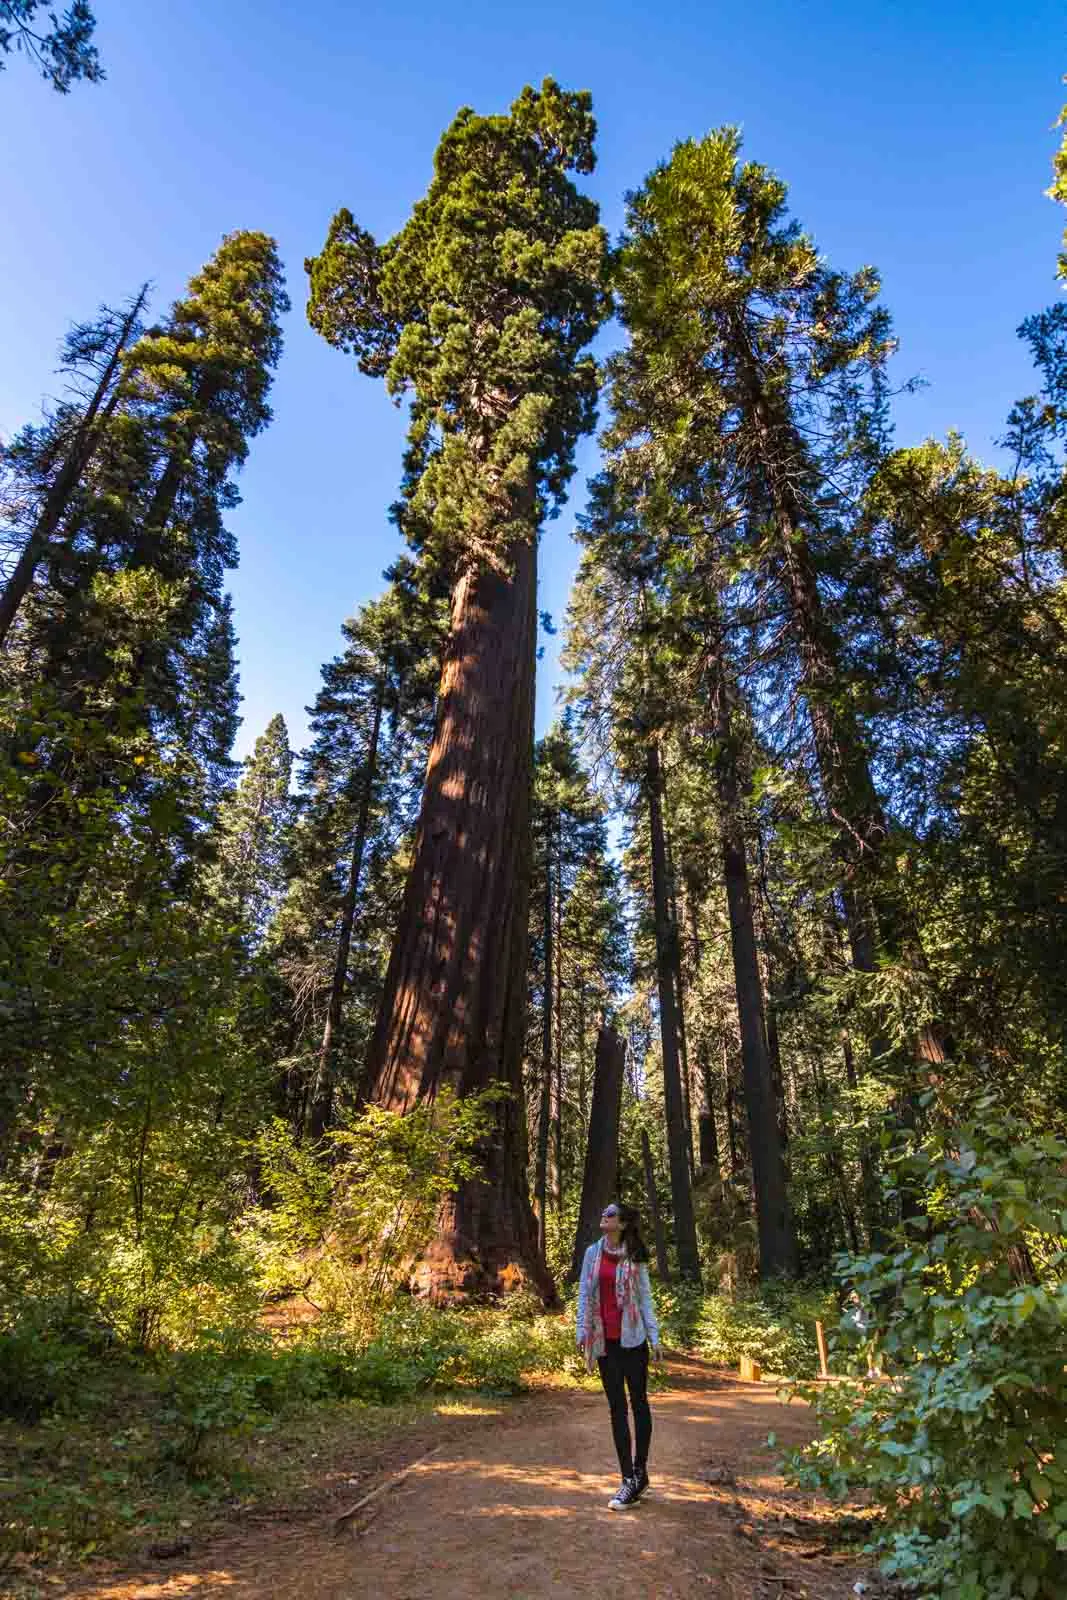 Big trees is yet another thing that should be added to your Northern California road trip